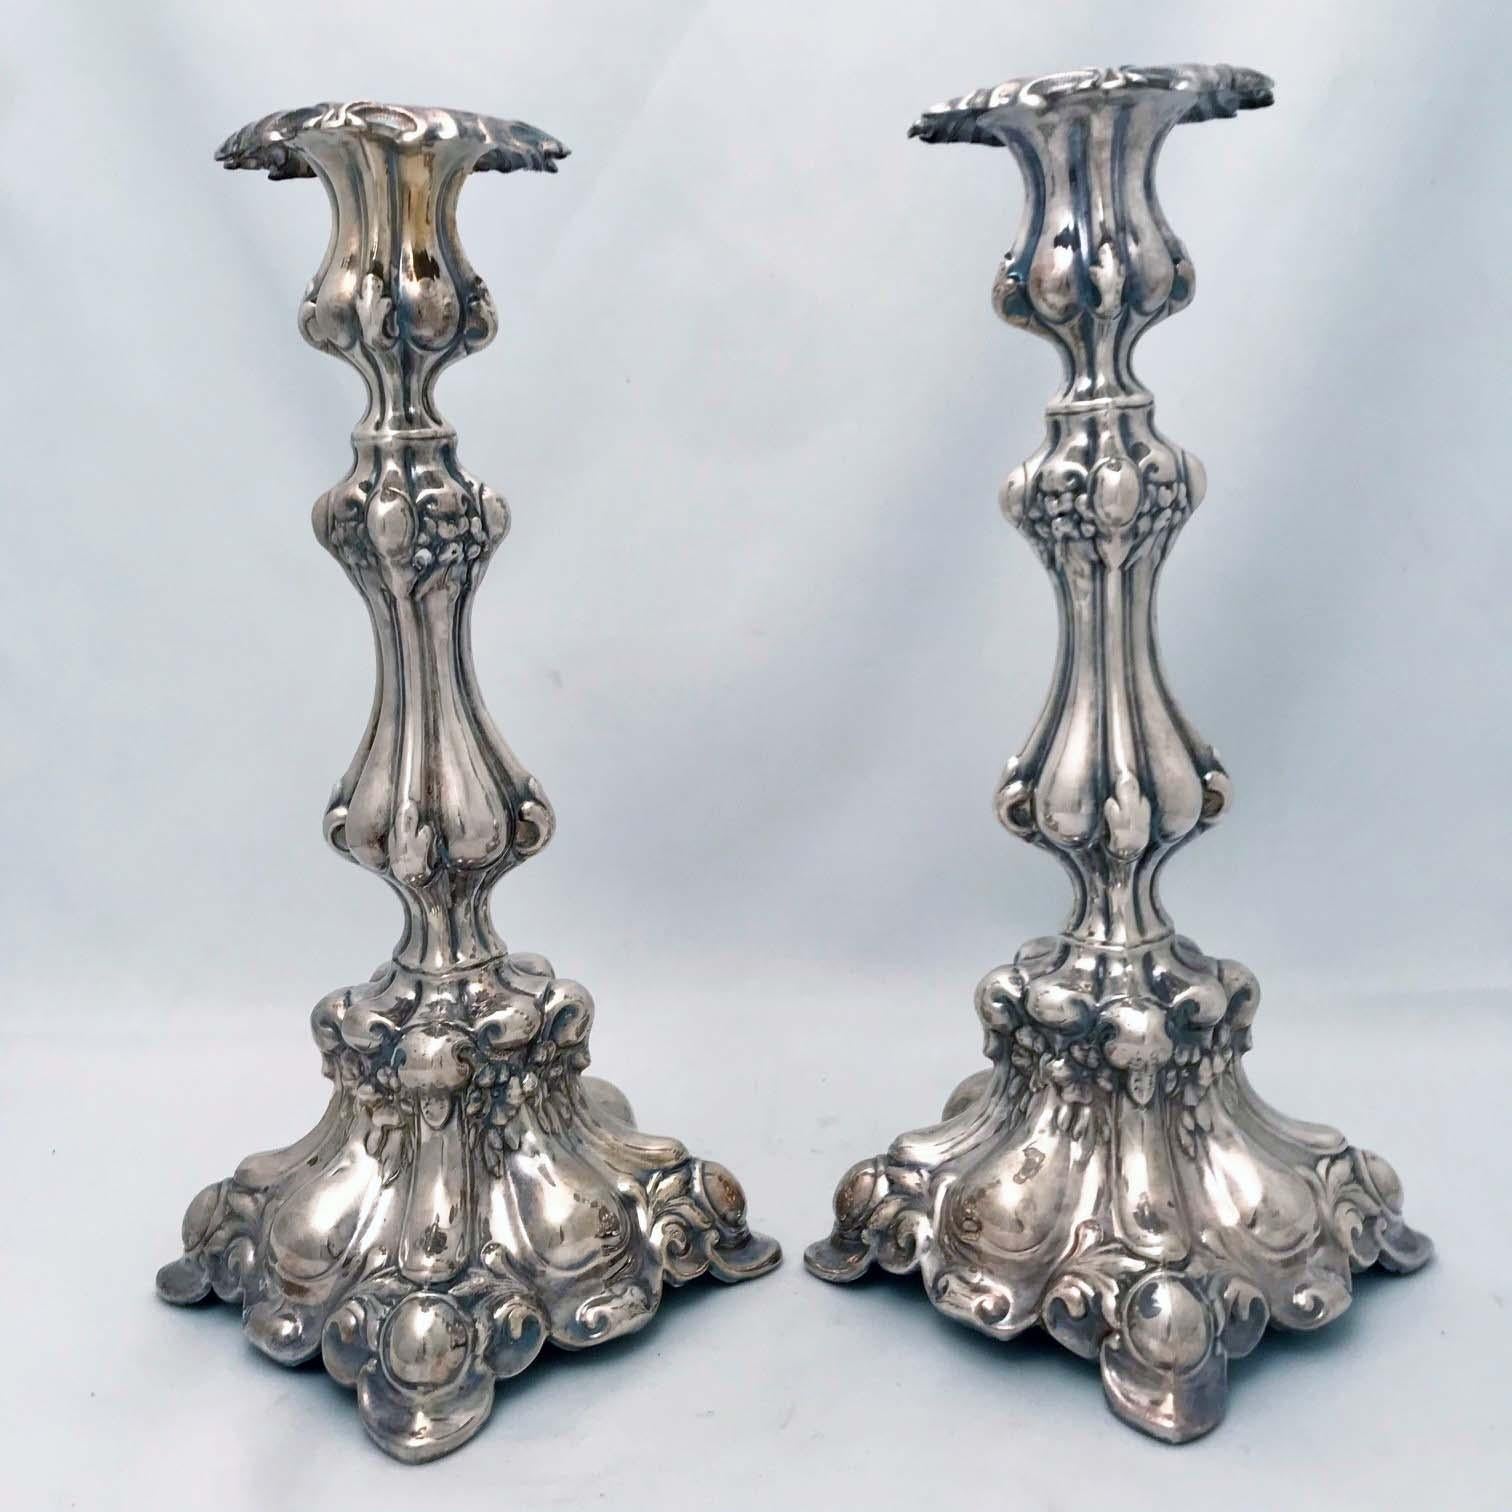 These Polish candlesticks are in the Baroque taste, vigorously modelled and boldly conceived. They were originally Sabbath candlesticks but they might well be used  for secular purposes by gentiles too. The plate is in generally good condition. They